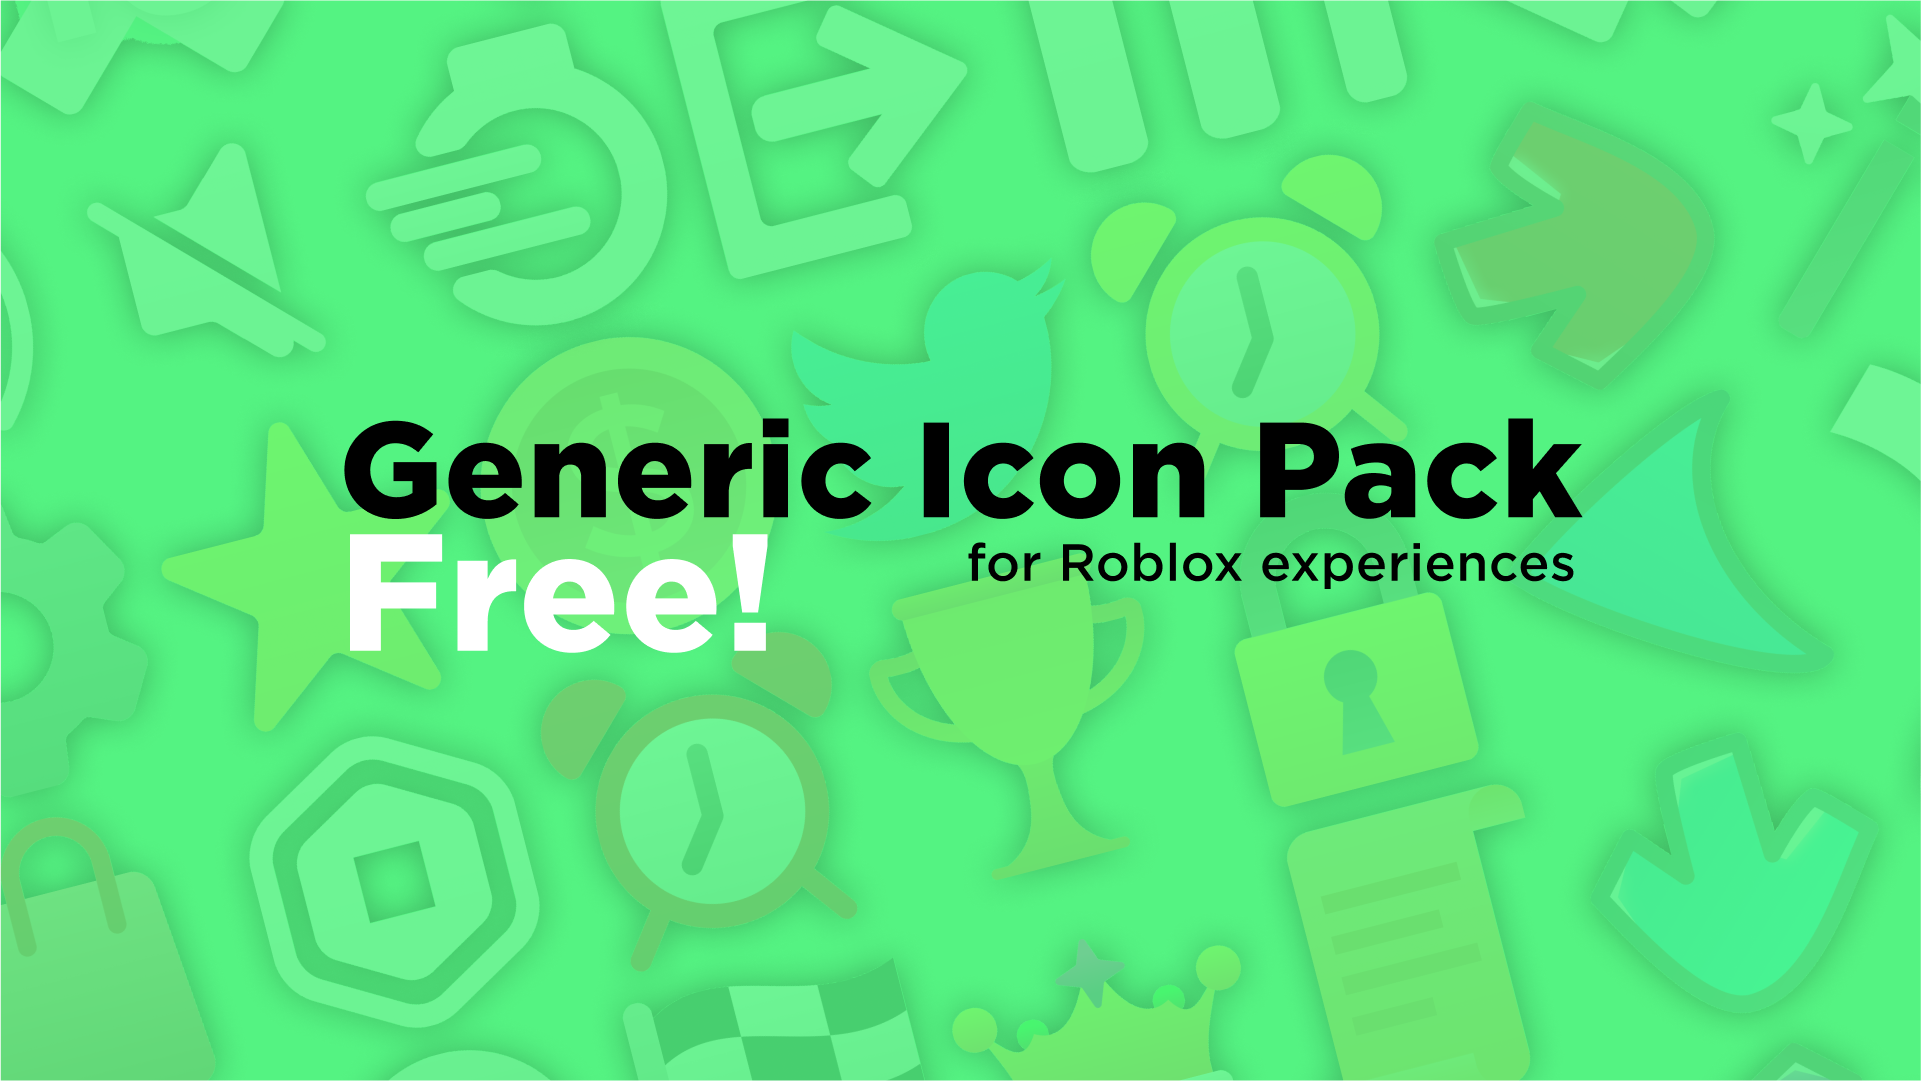 Generic Icon Pack by Streeteenk